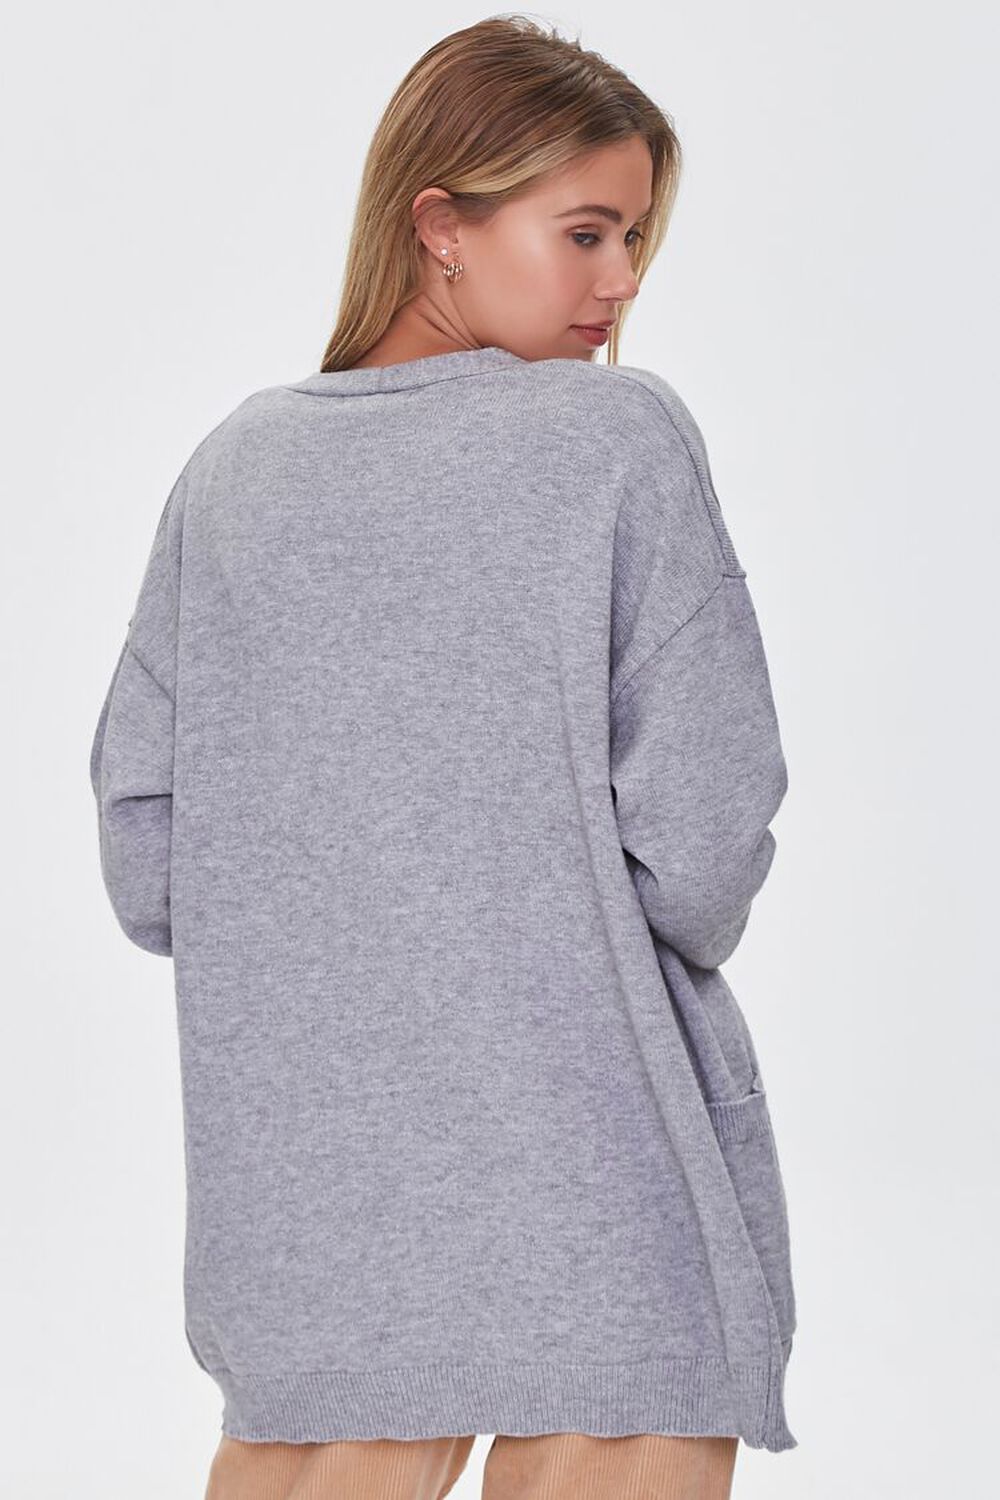 HEATHER GREY Open-Front Cardigan Sweater, image 3